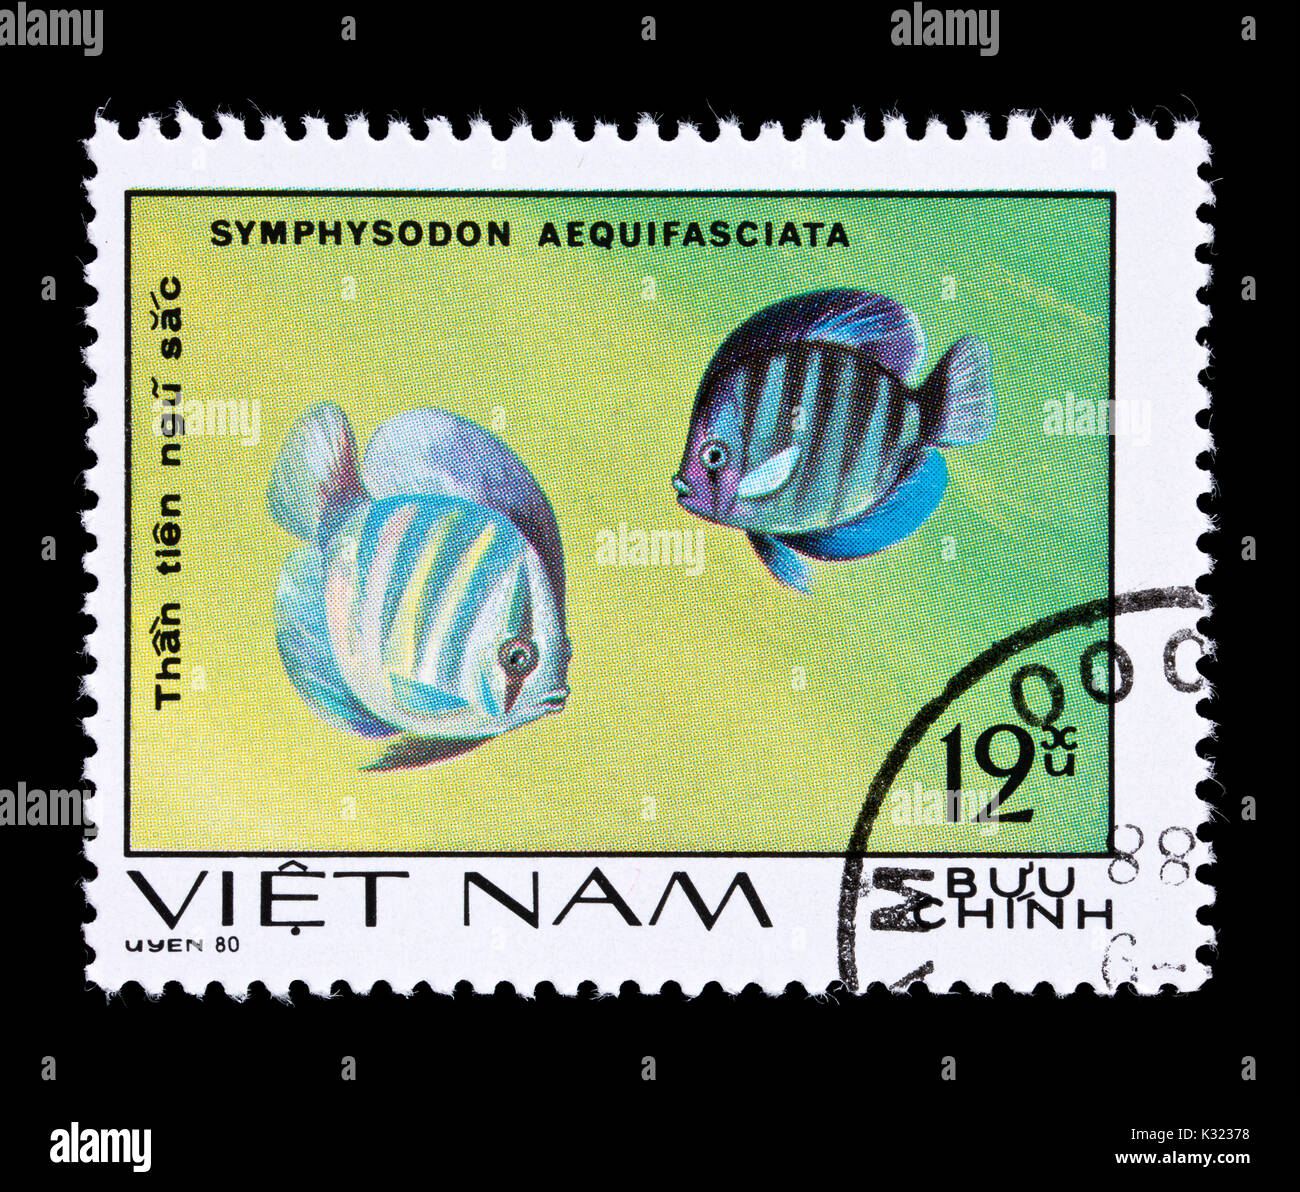 Postage stamp from Vietnam depicting blue discus or brown discus (Symphysodon aequifasciata) Stock Photo